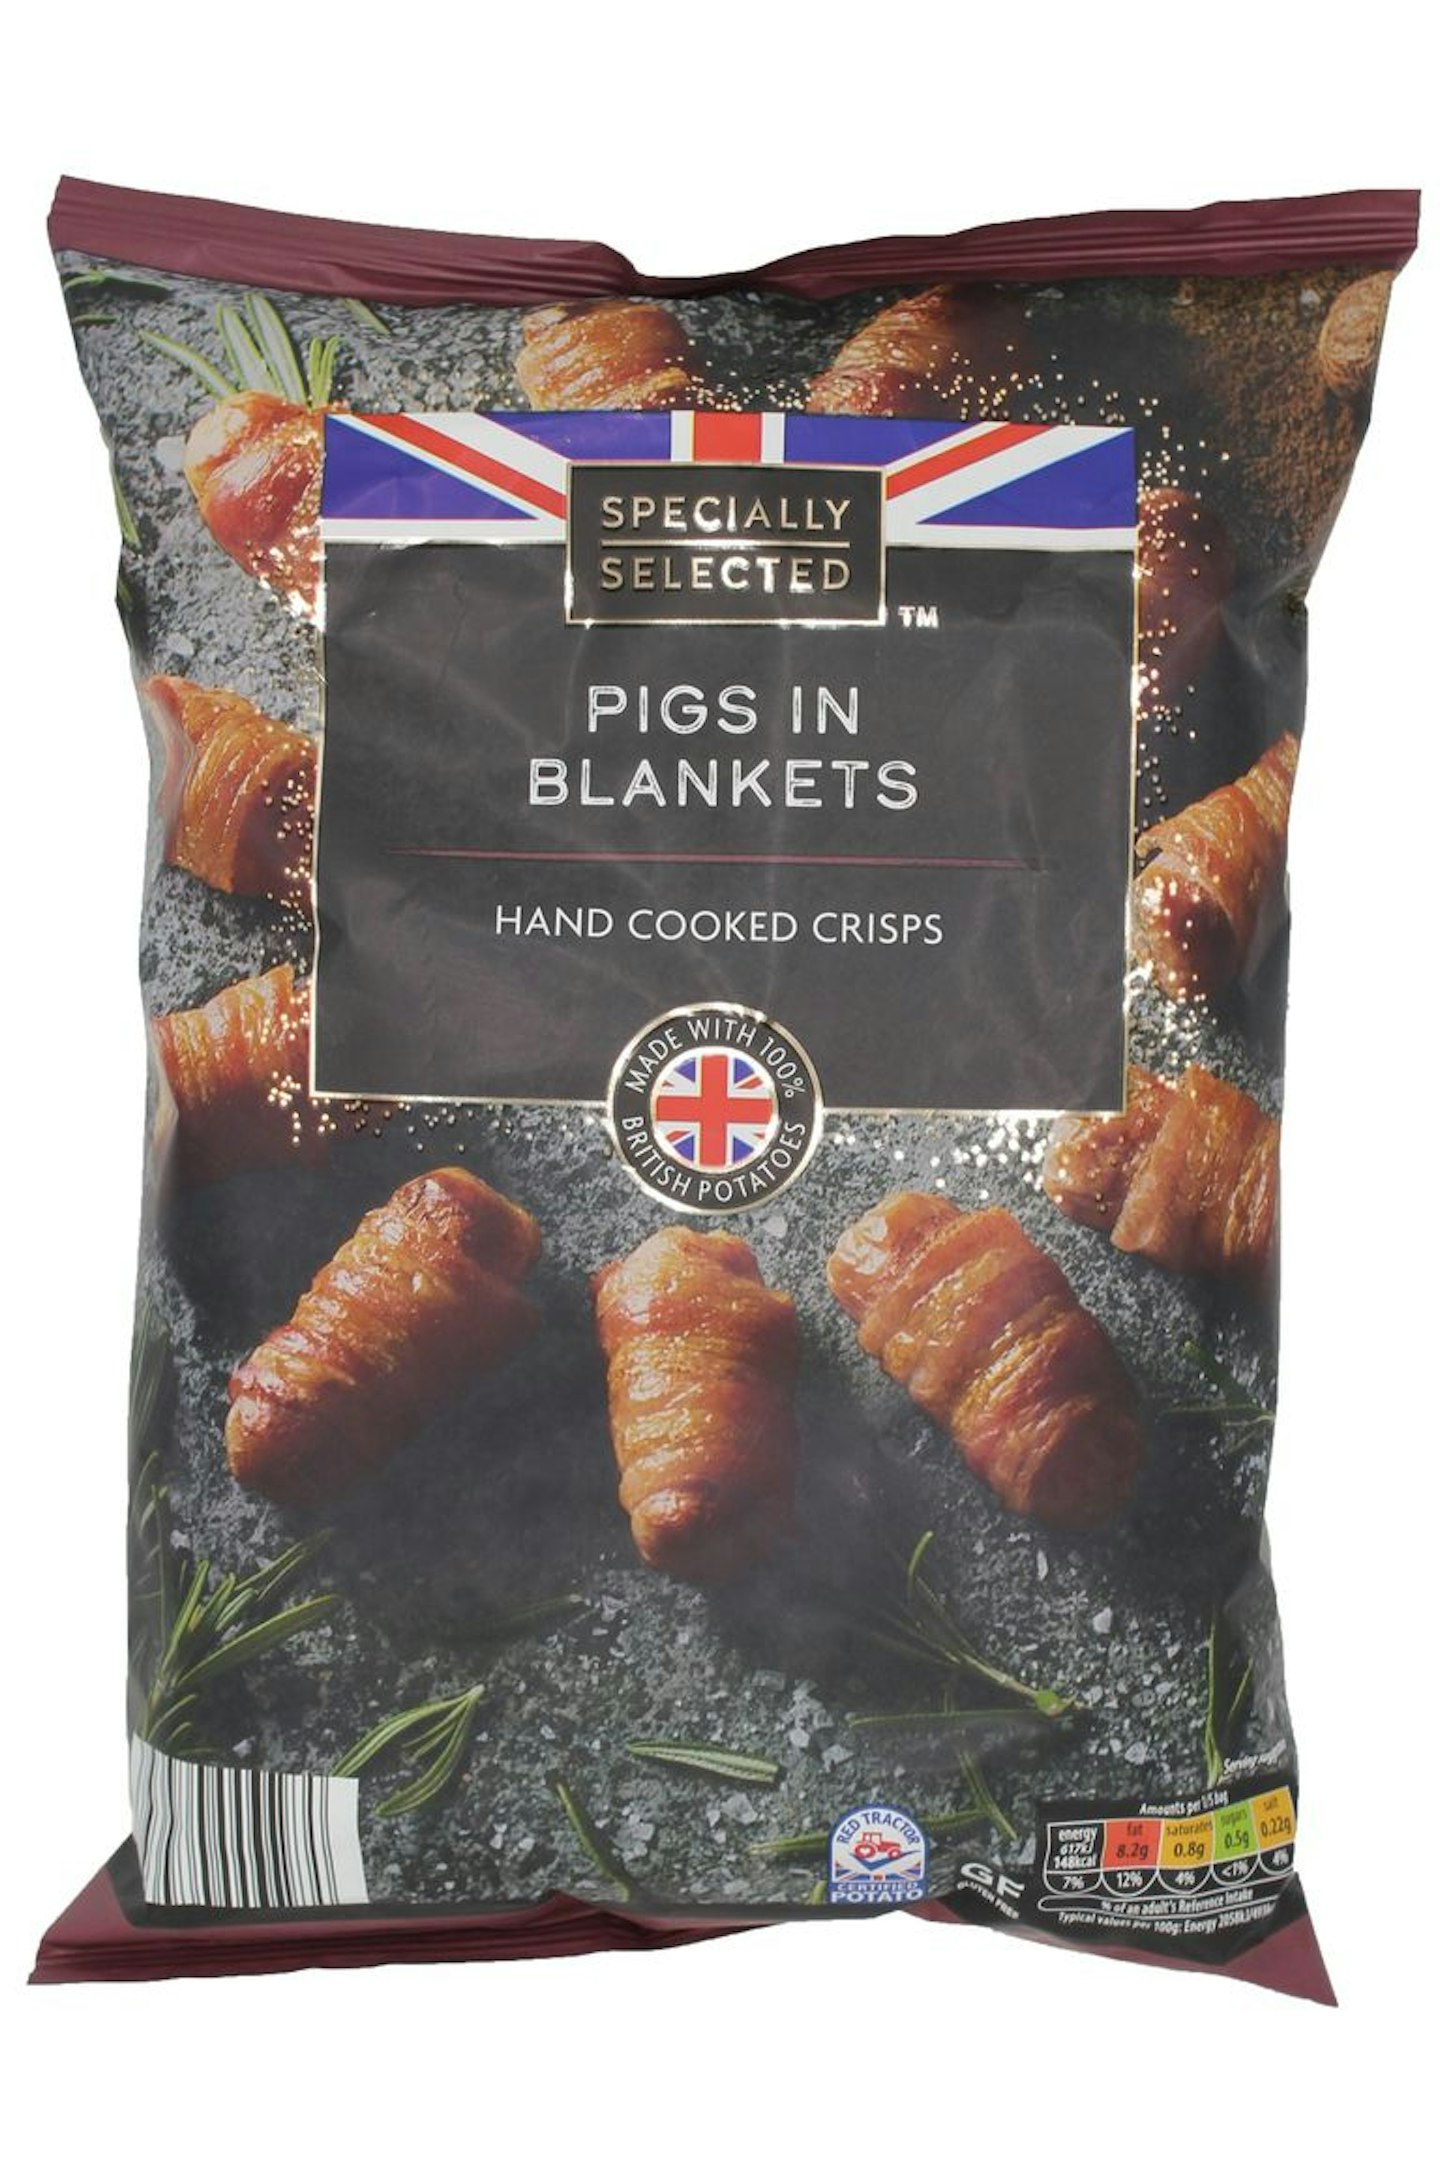 Aldi Specially Selected Pigs In Blankets Hand Cooked Crisps, 75p